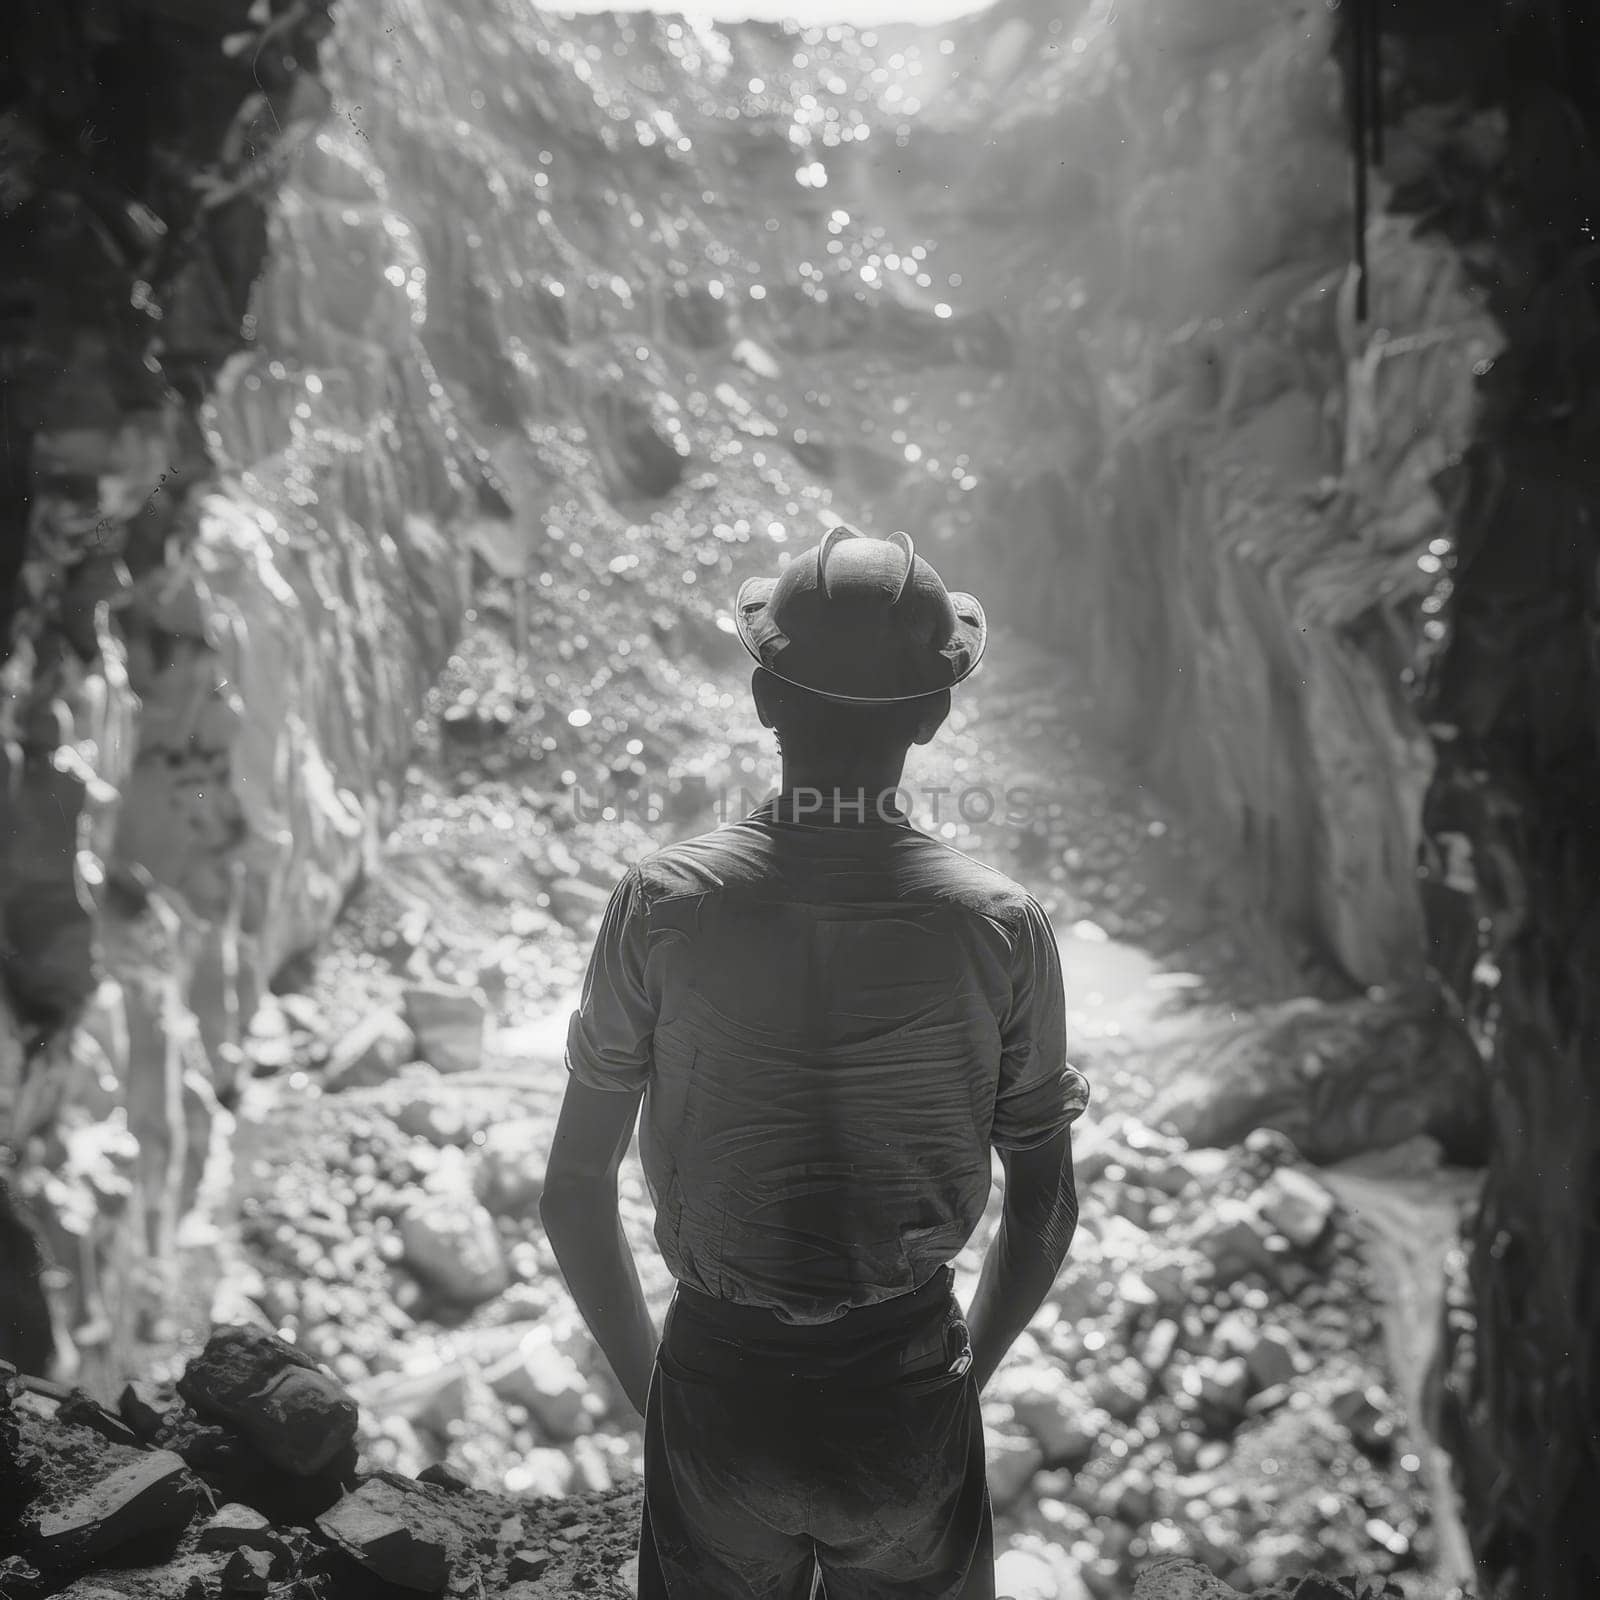 Miner stands contemplatively at the precipice of a sunlit mine entrance